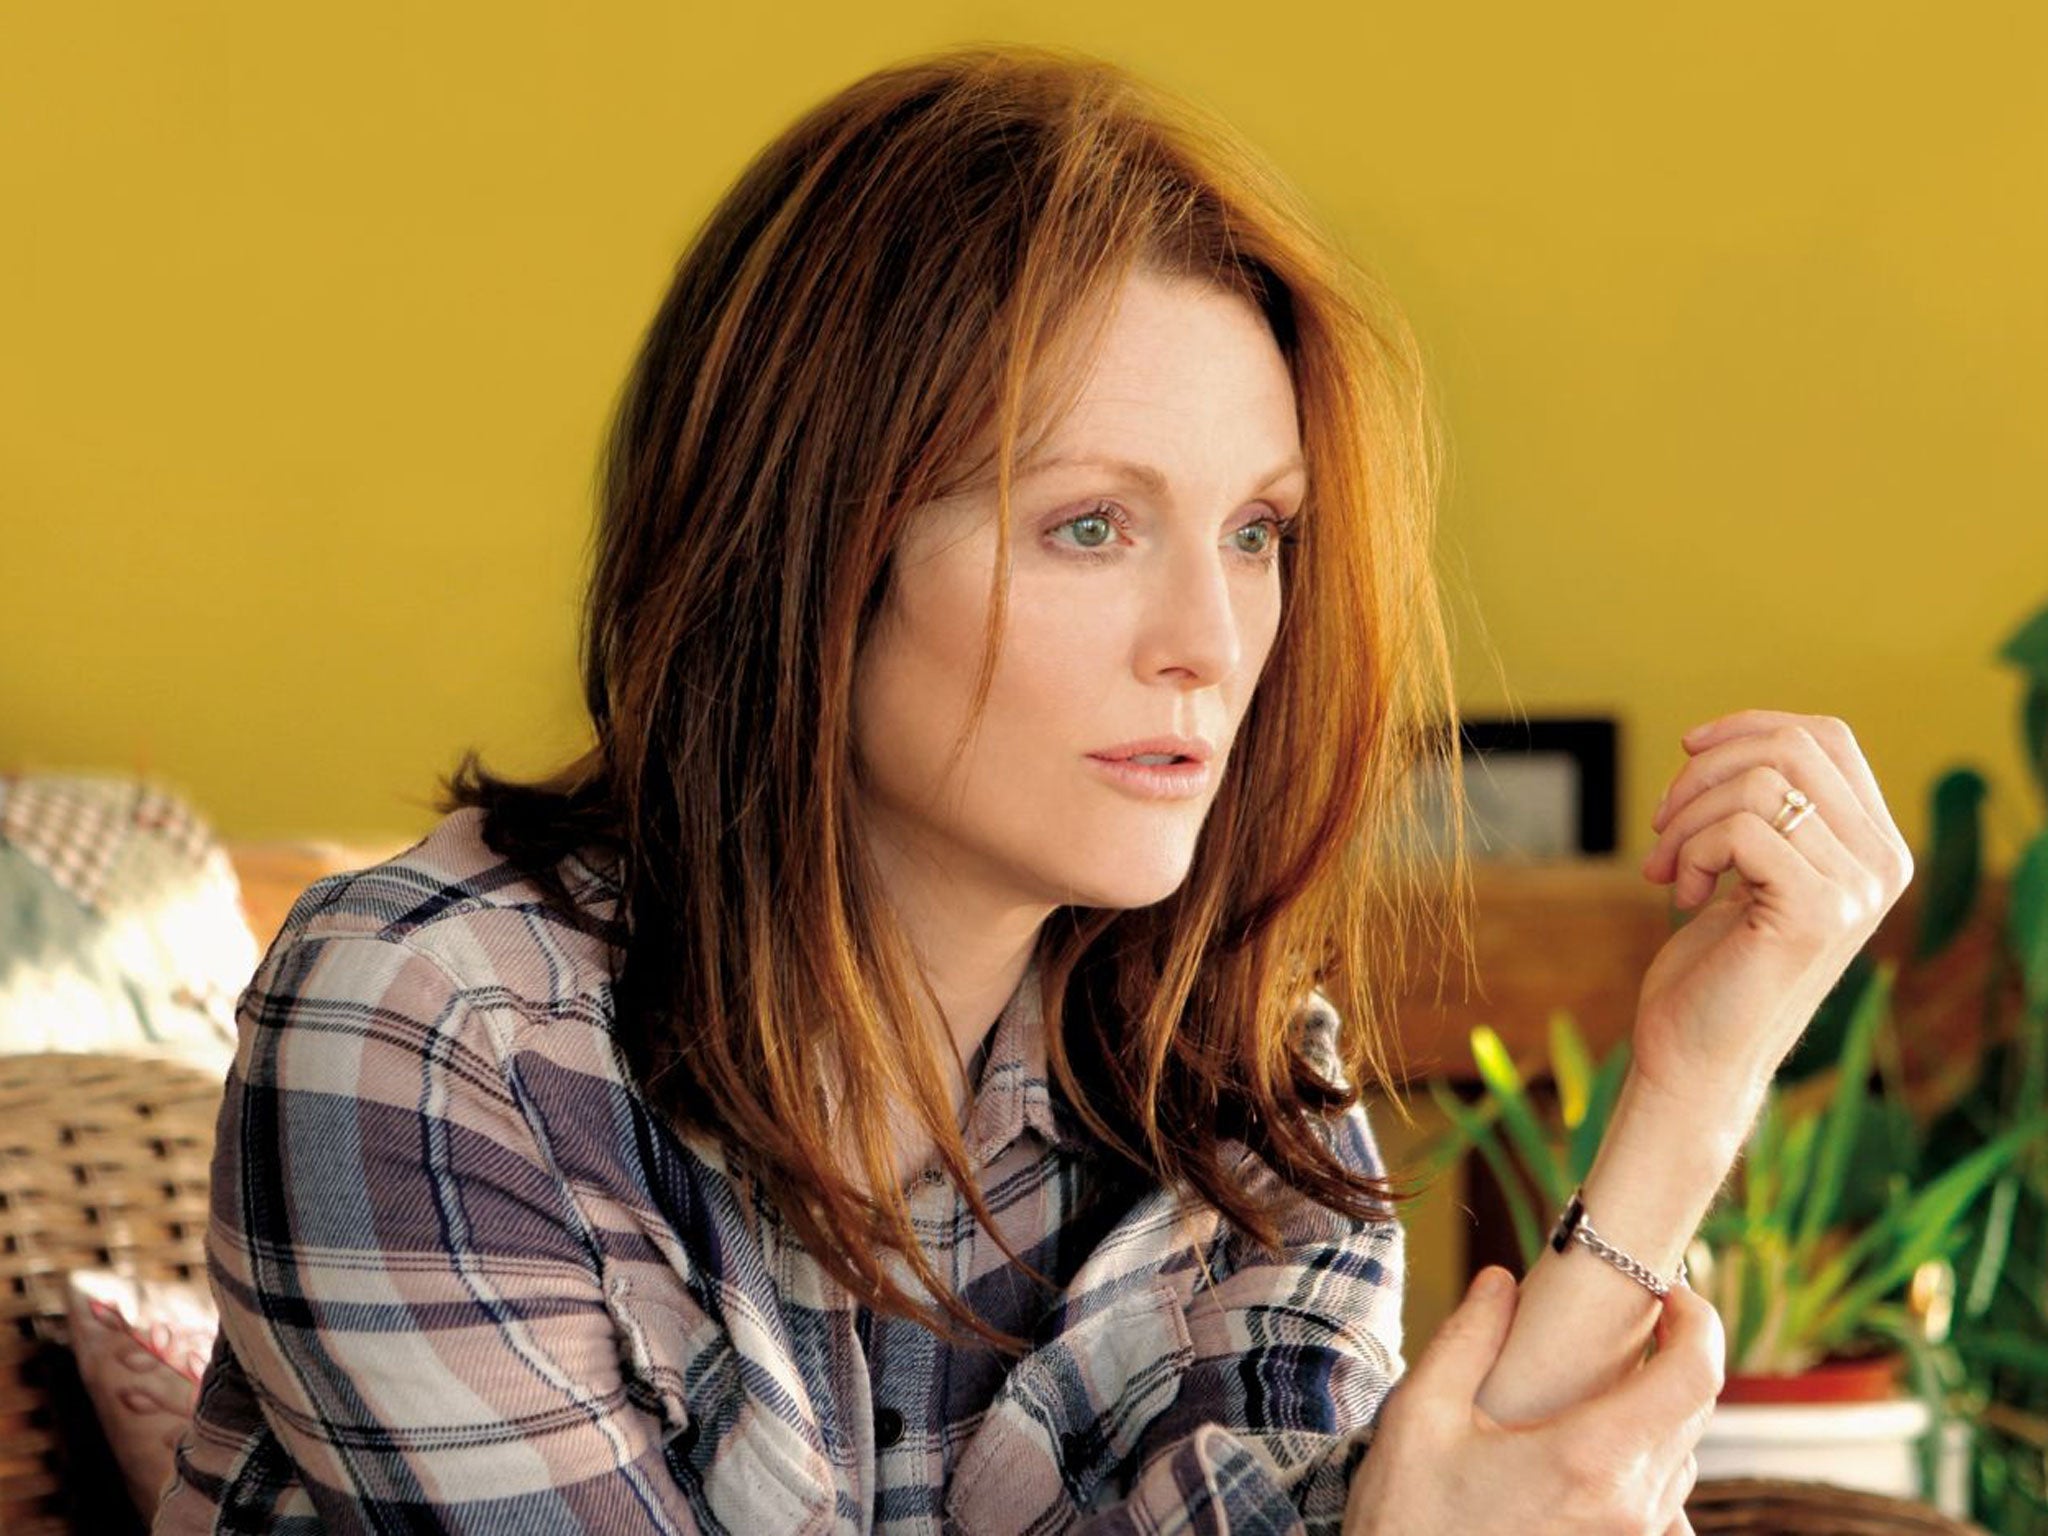 Julianne Moore plays the protagonist in Still Alice, who develops Alzheimer's after getting lost on a jog